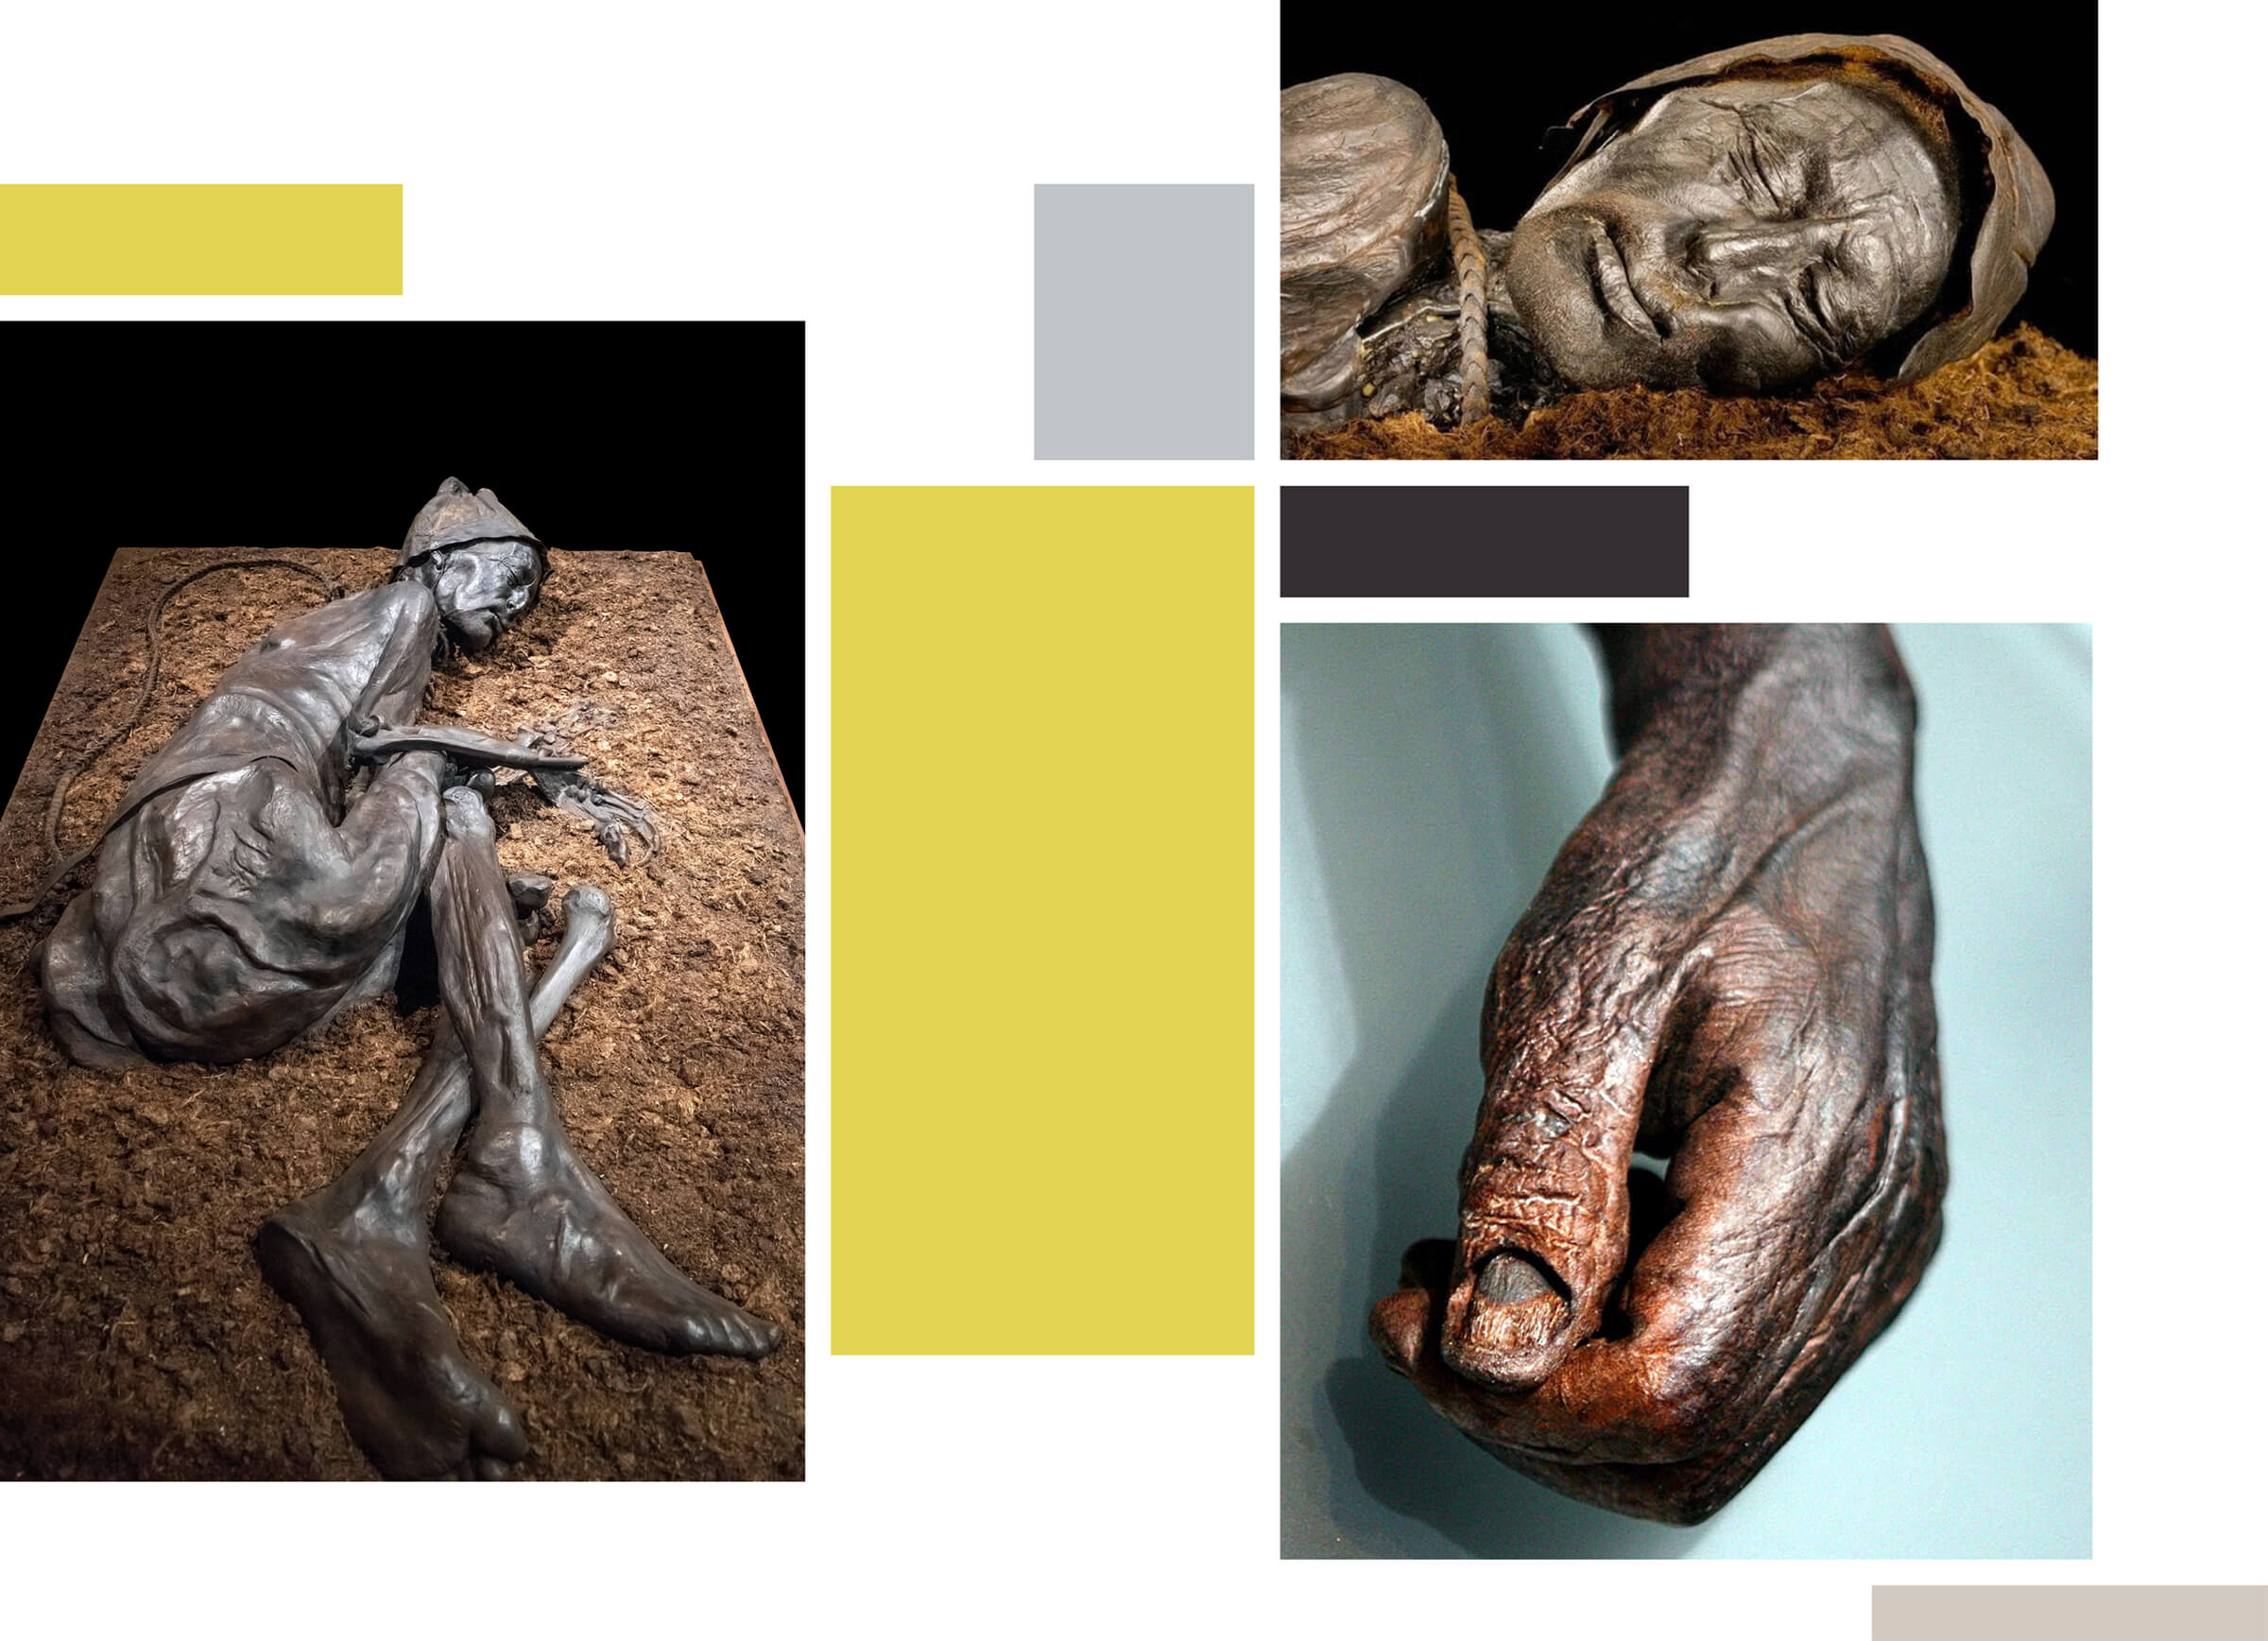 The Tollund Man lived 2,300 years ago and was so well-preserved in the peat and the cold it was initially mistaken as a modern-day murder victim. The mummified corpse is believed to be that of a man who died by hanging // hand photo by PA Images / Alamy Stock Photo; full body photo by Ian Dagnall / Alamy Stock Photo; close-up of head photo by Mummipedia Wiki / Fandom